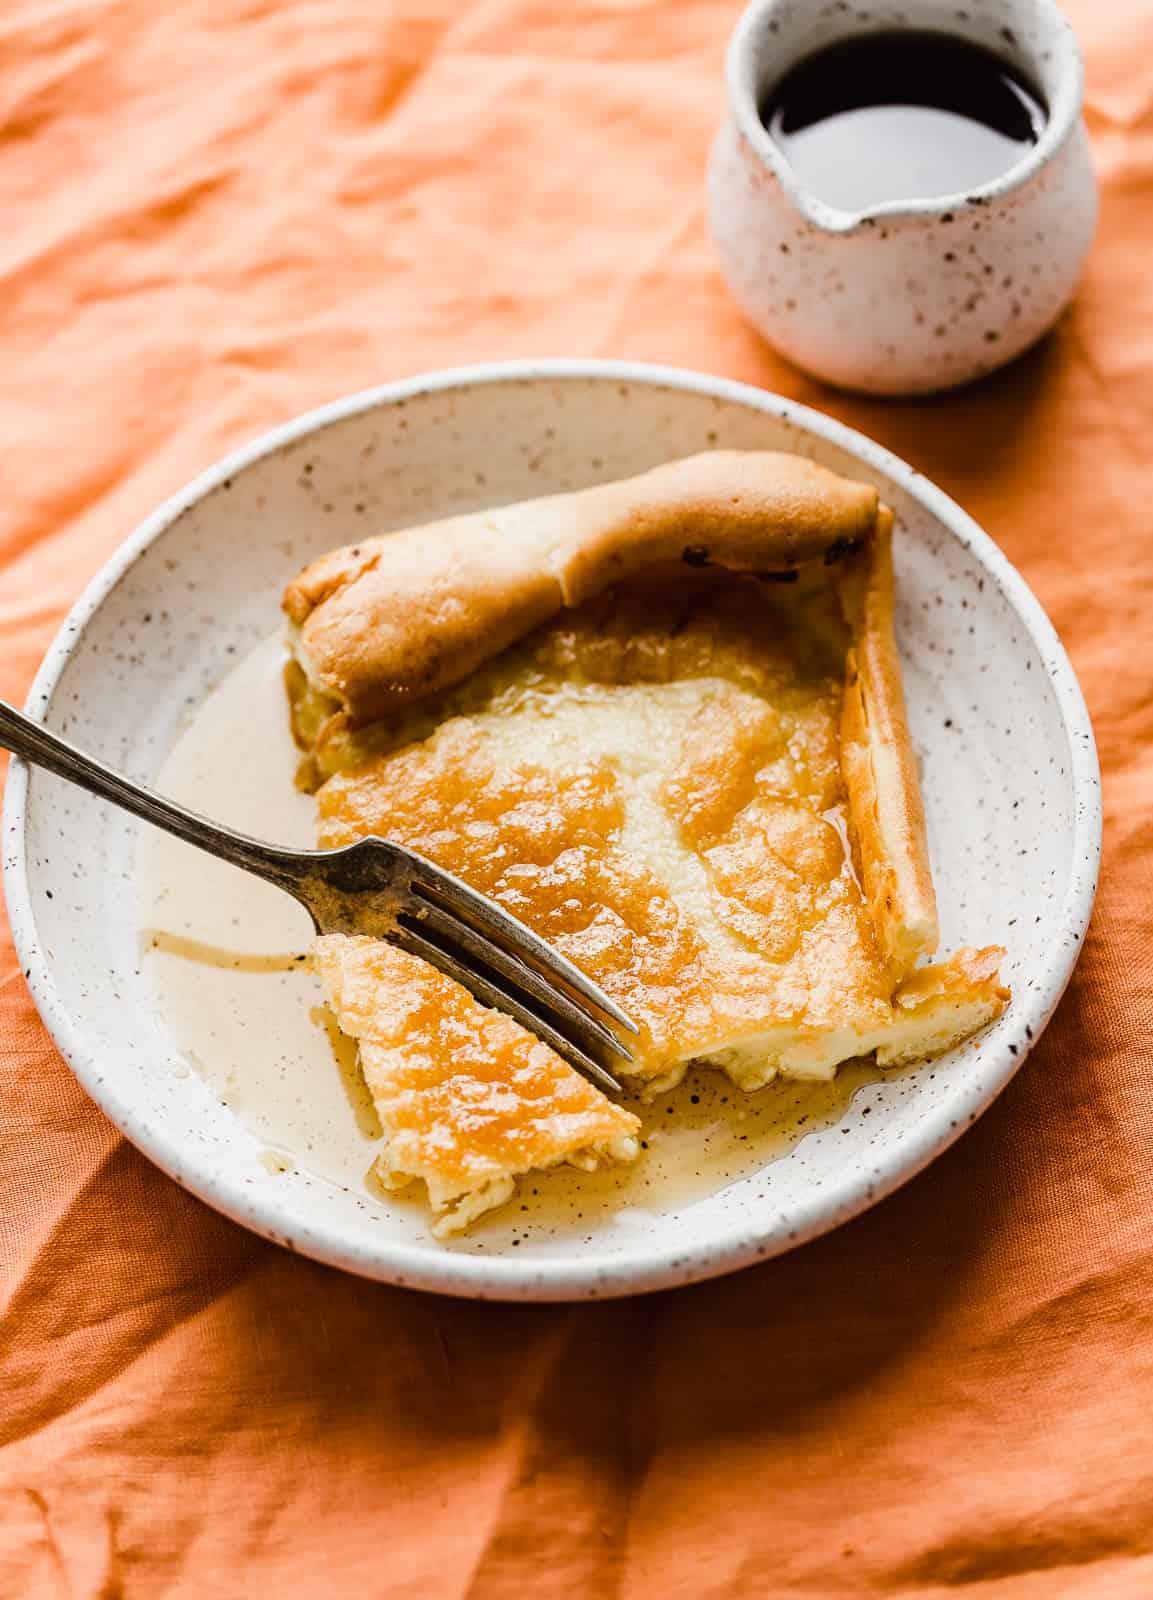 A slice of a German Pancake on a white plate with syrup over the pancake.